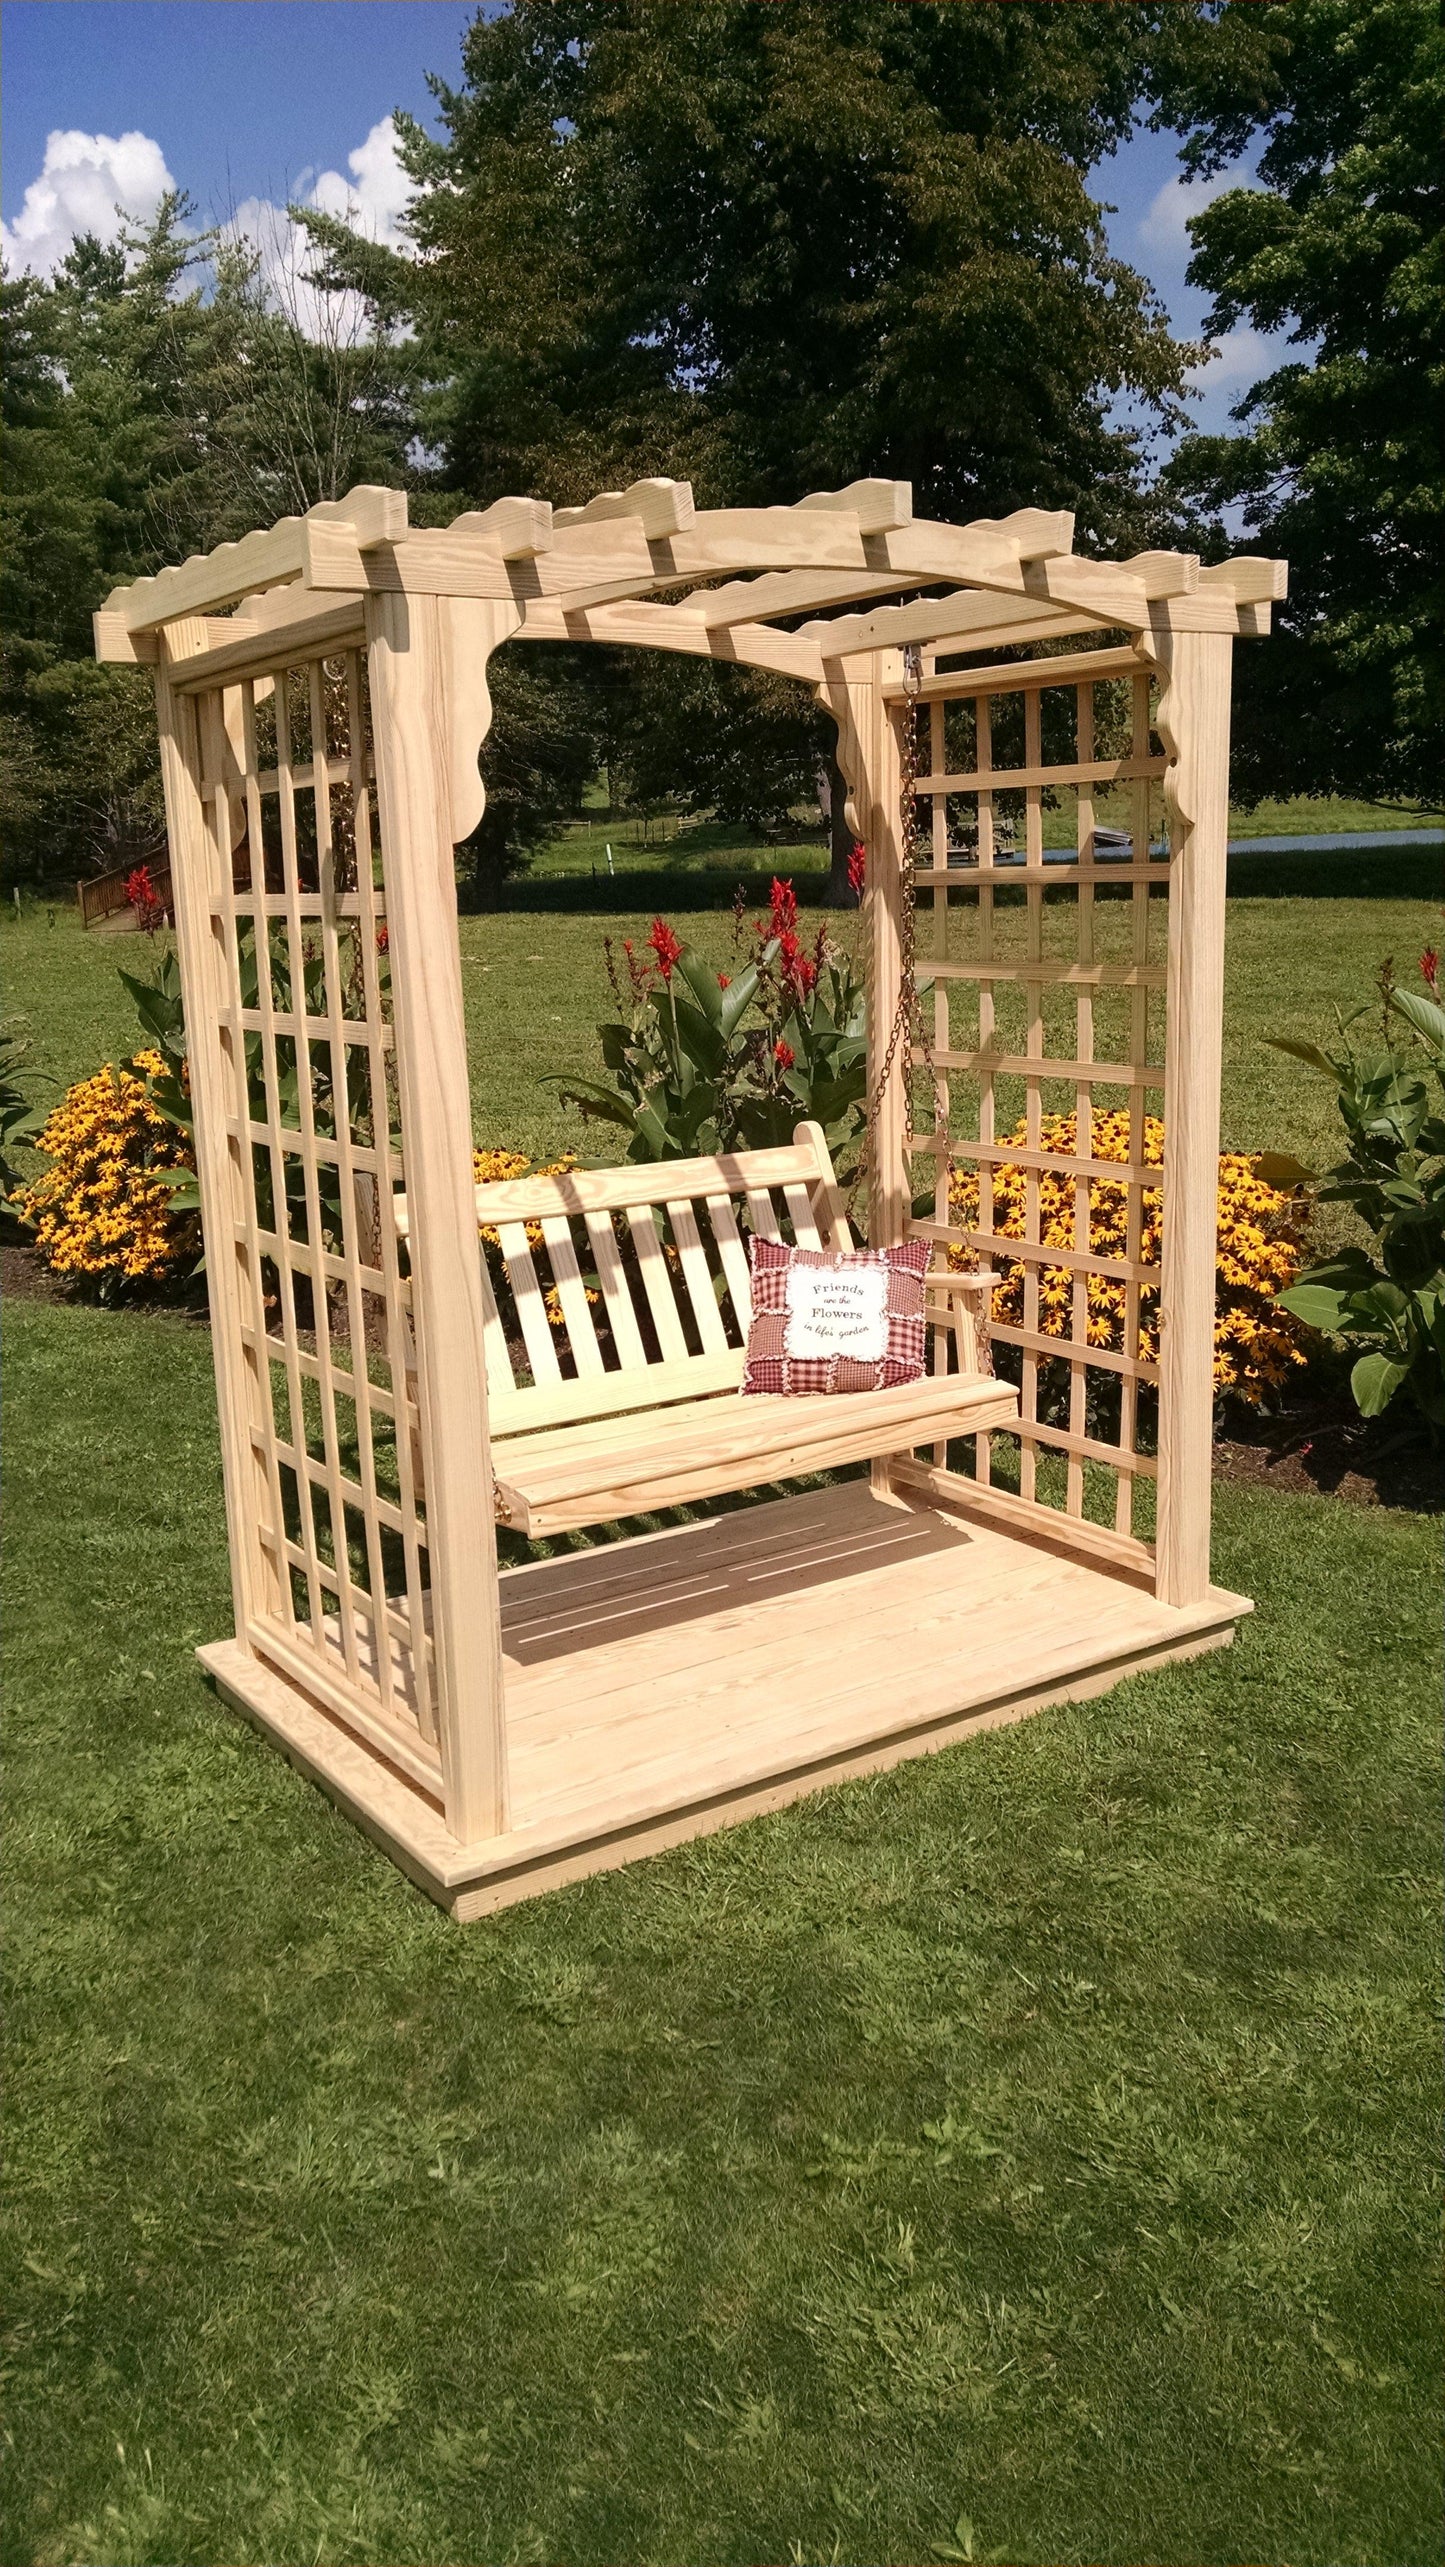 A&L FURNITURE CO. 6' Cambridge Pressure Treated Pine Arbor w/ Deck & Swing - LEAD TIME TO SHIP 10 BUSINESS DAYS